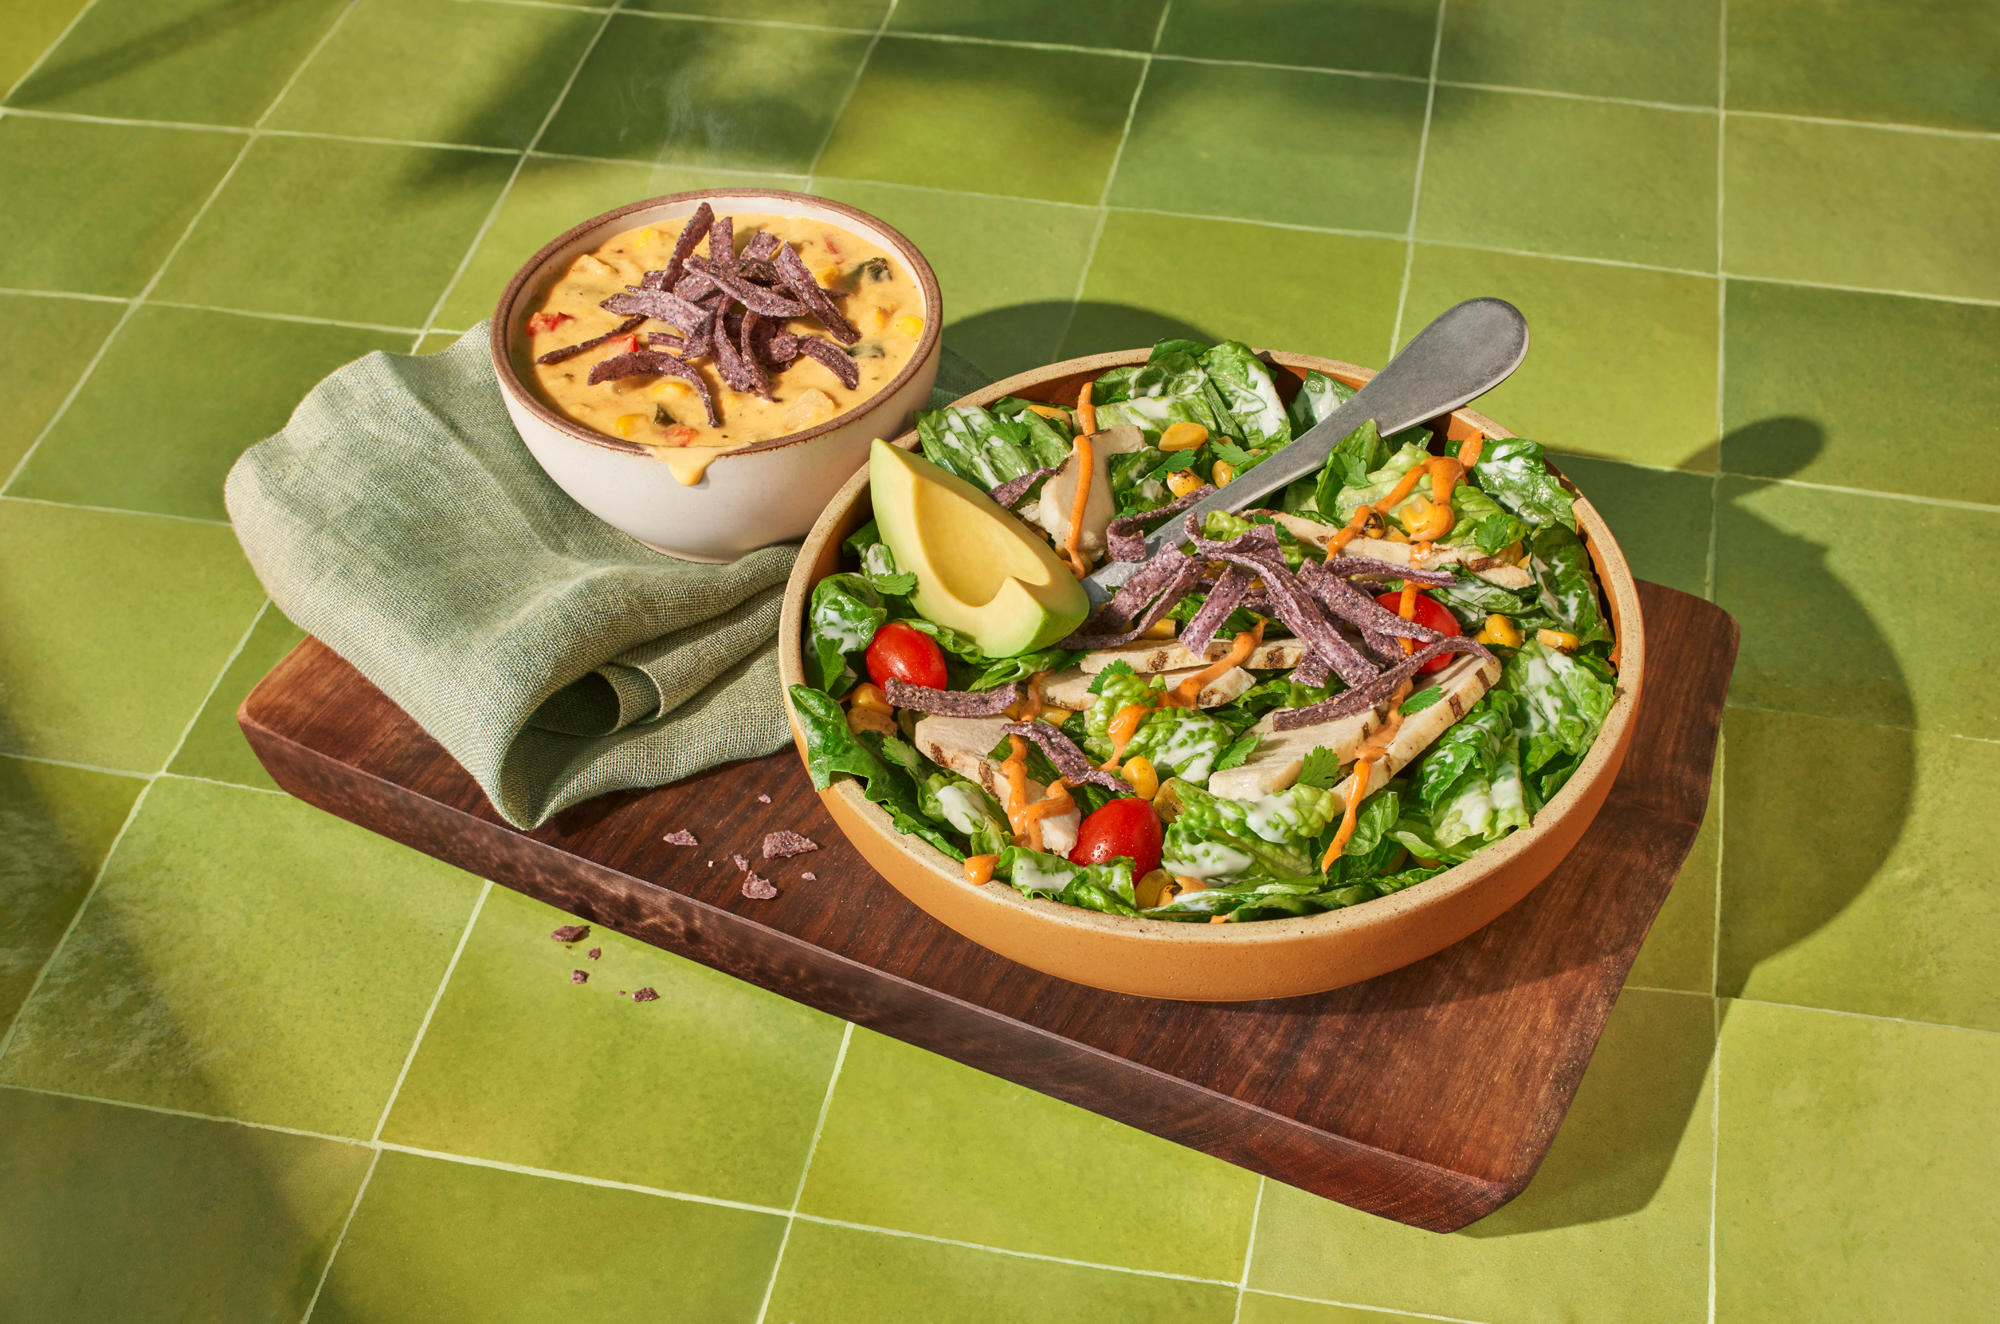 Southwest Chicken Ranch Salad & Mexican Street Corn Chowder Cup You Pick 2 Panera Bread Lake Bluff (847)604-8451